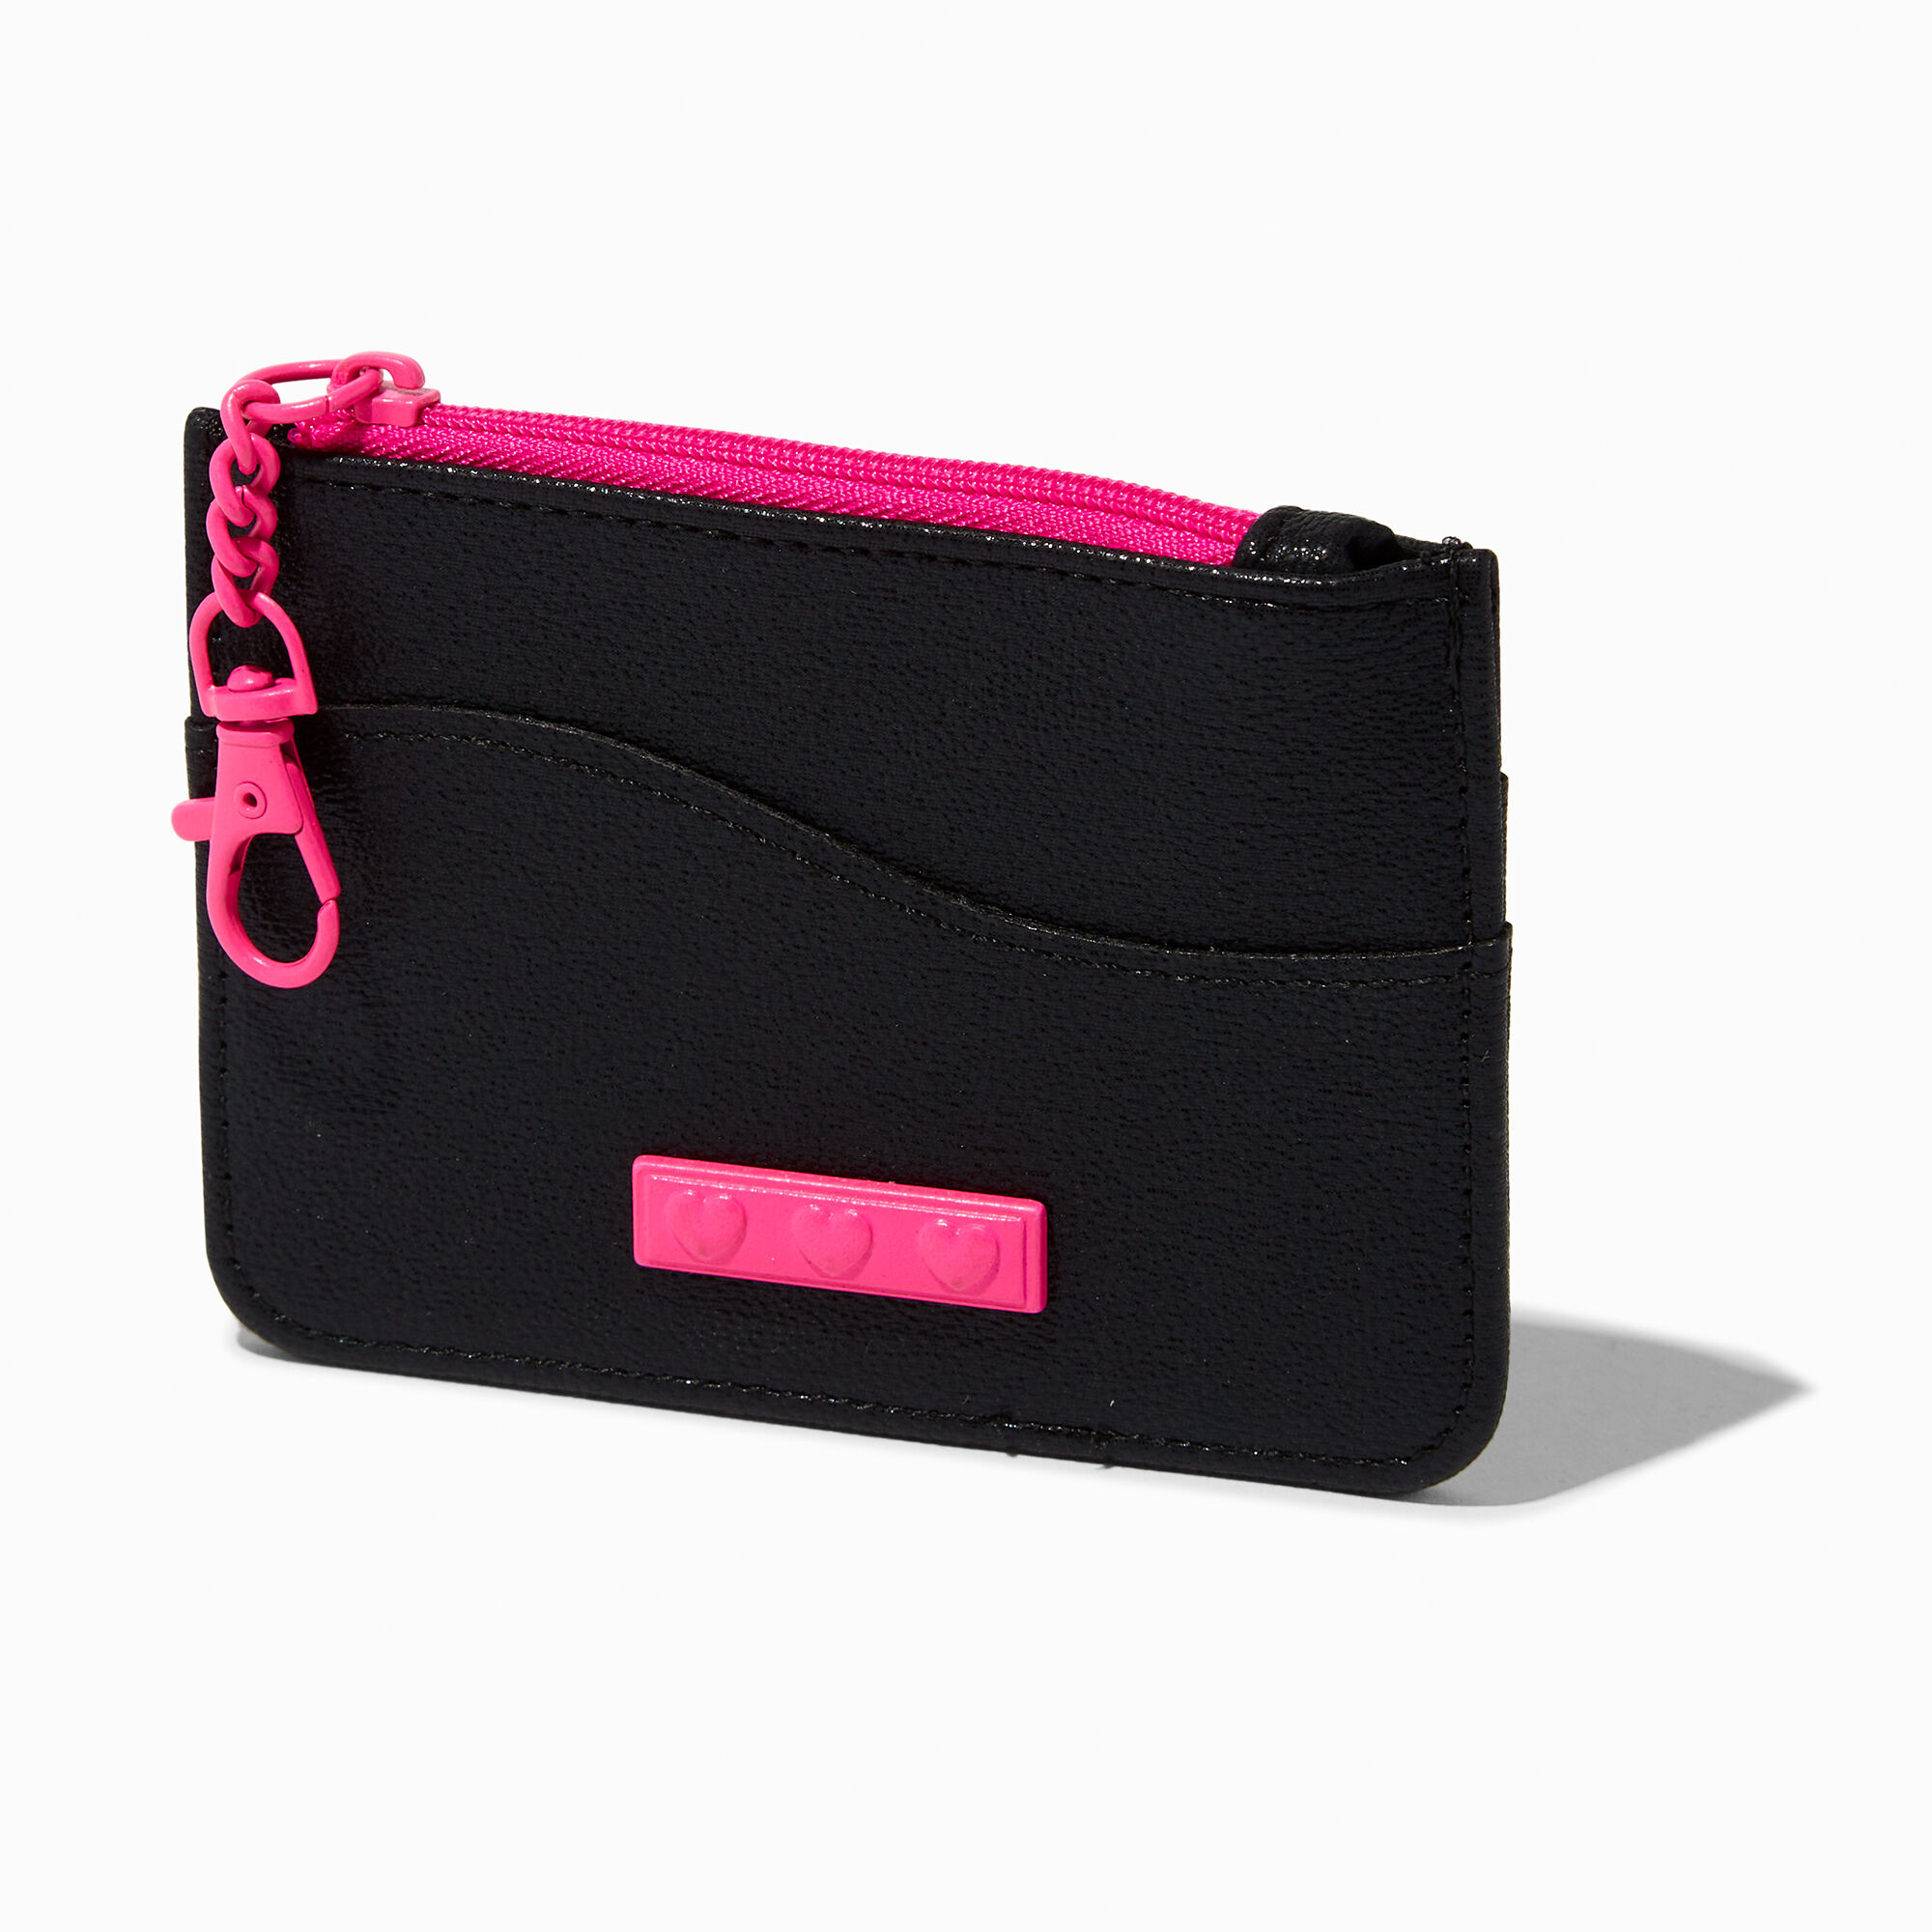 View Claires Card Wallet Black information